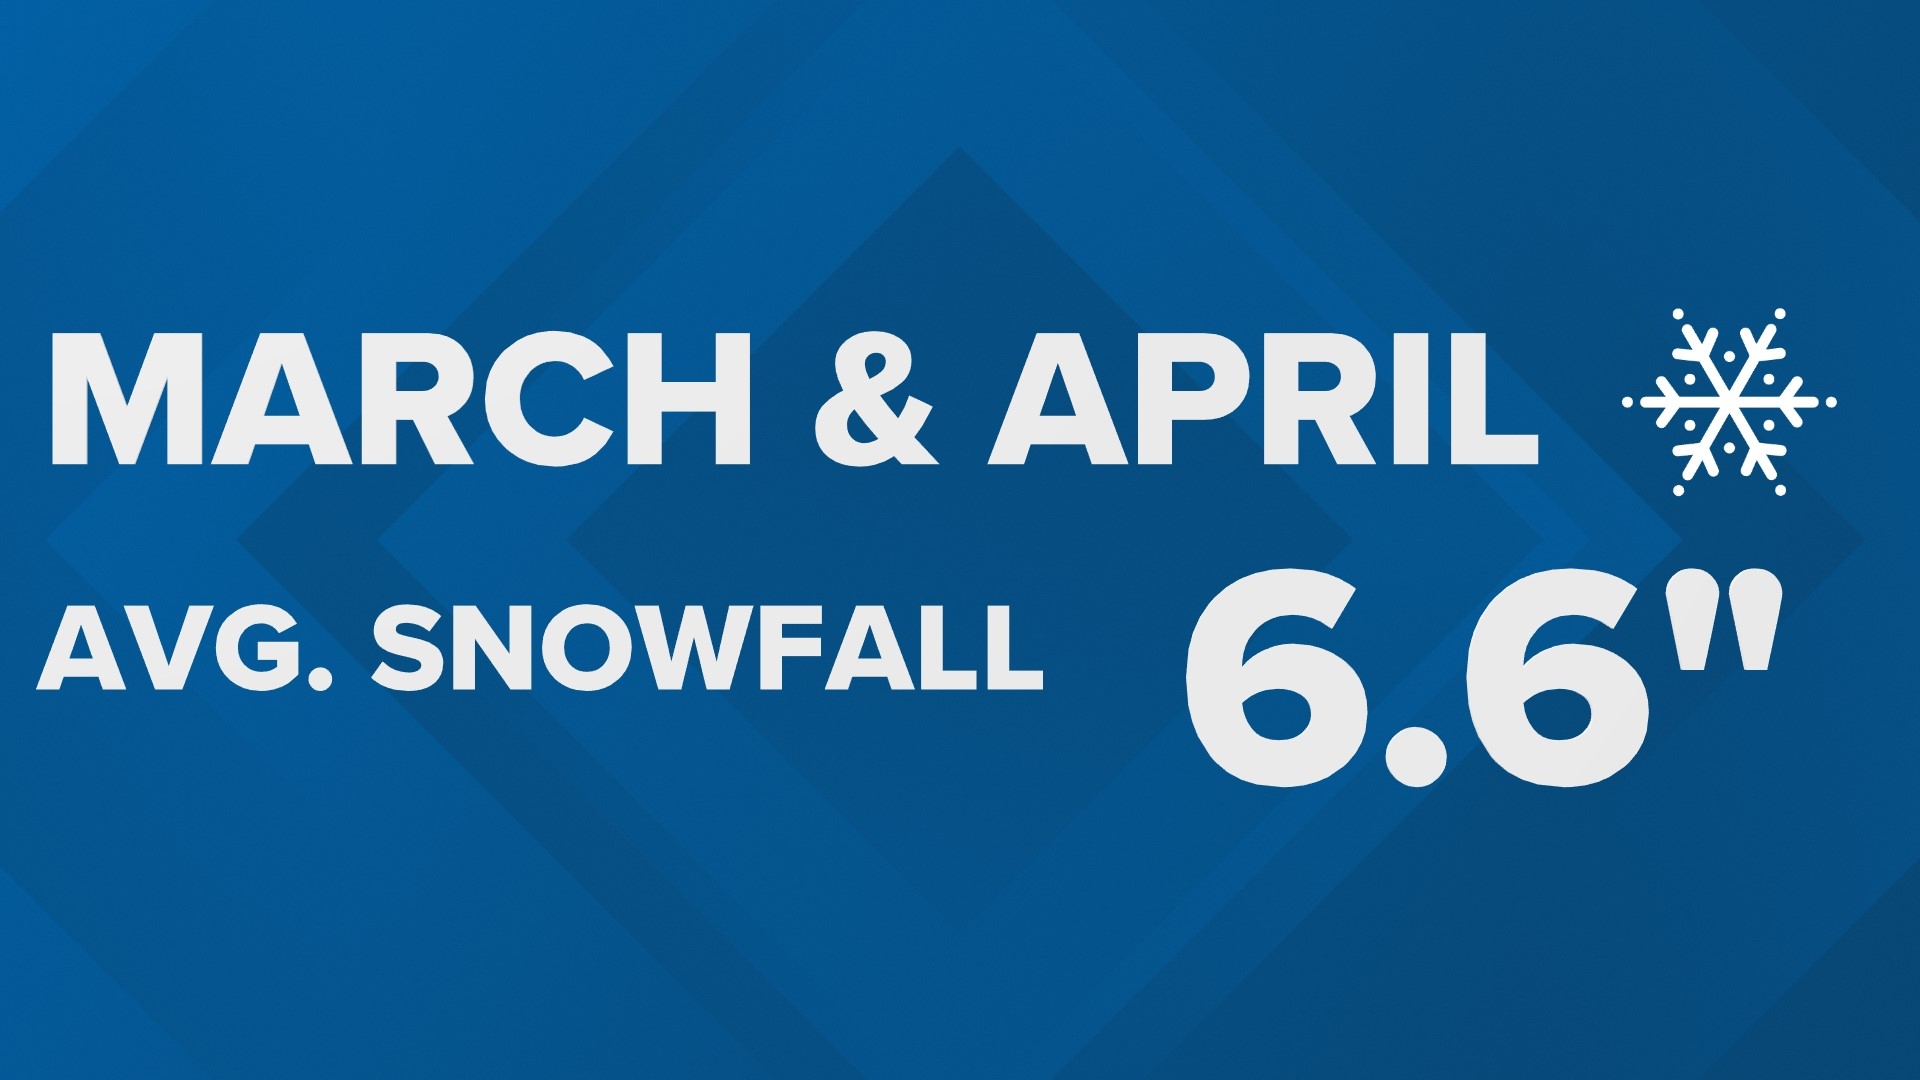 Meteorologist Diane Phillips shows us the difference in snow total between the winter months and our March and April snow averages.